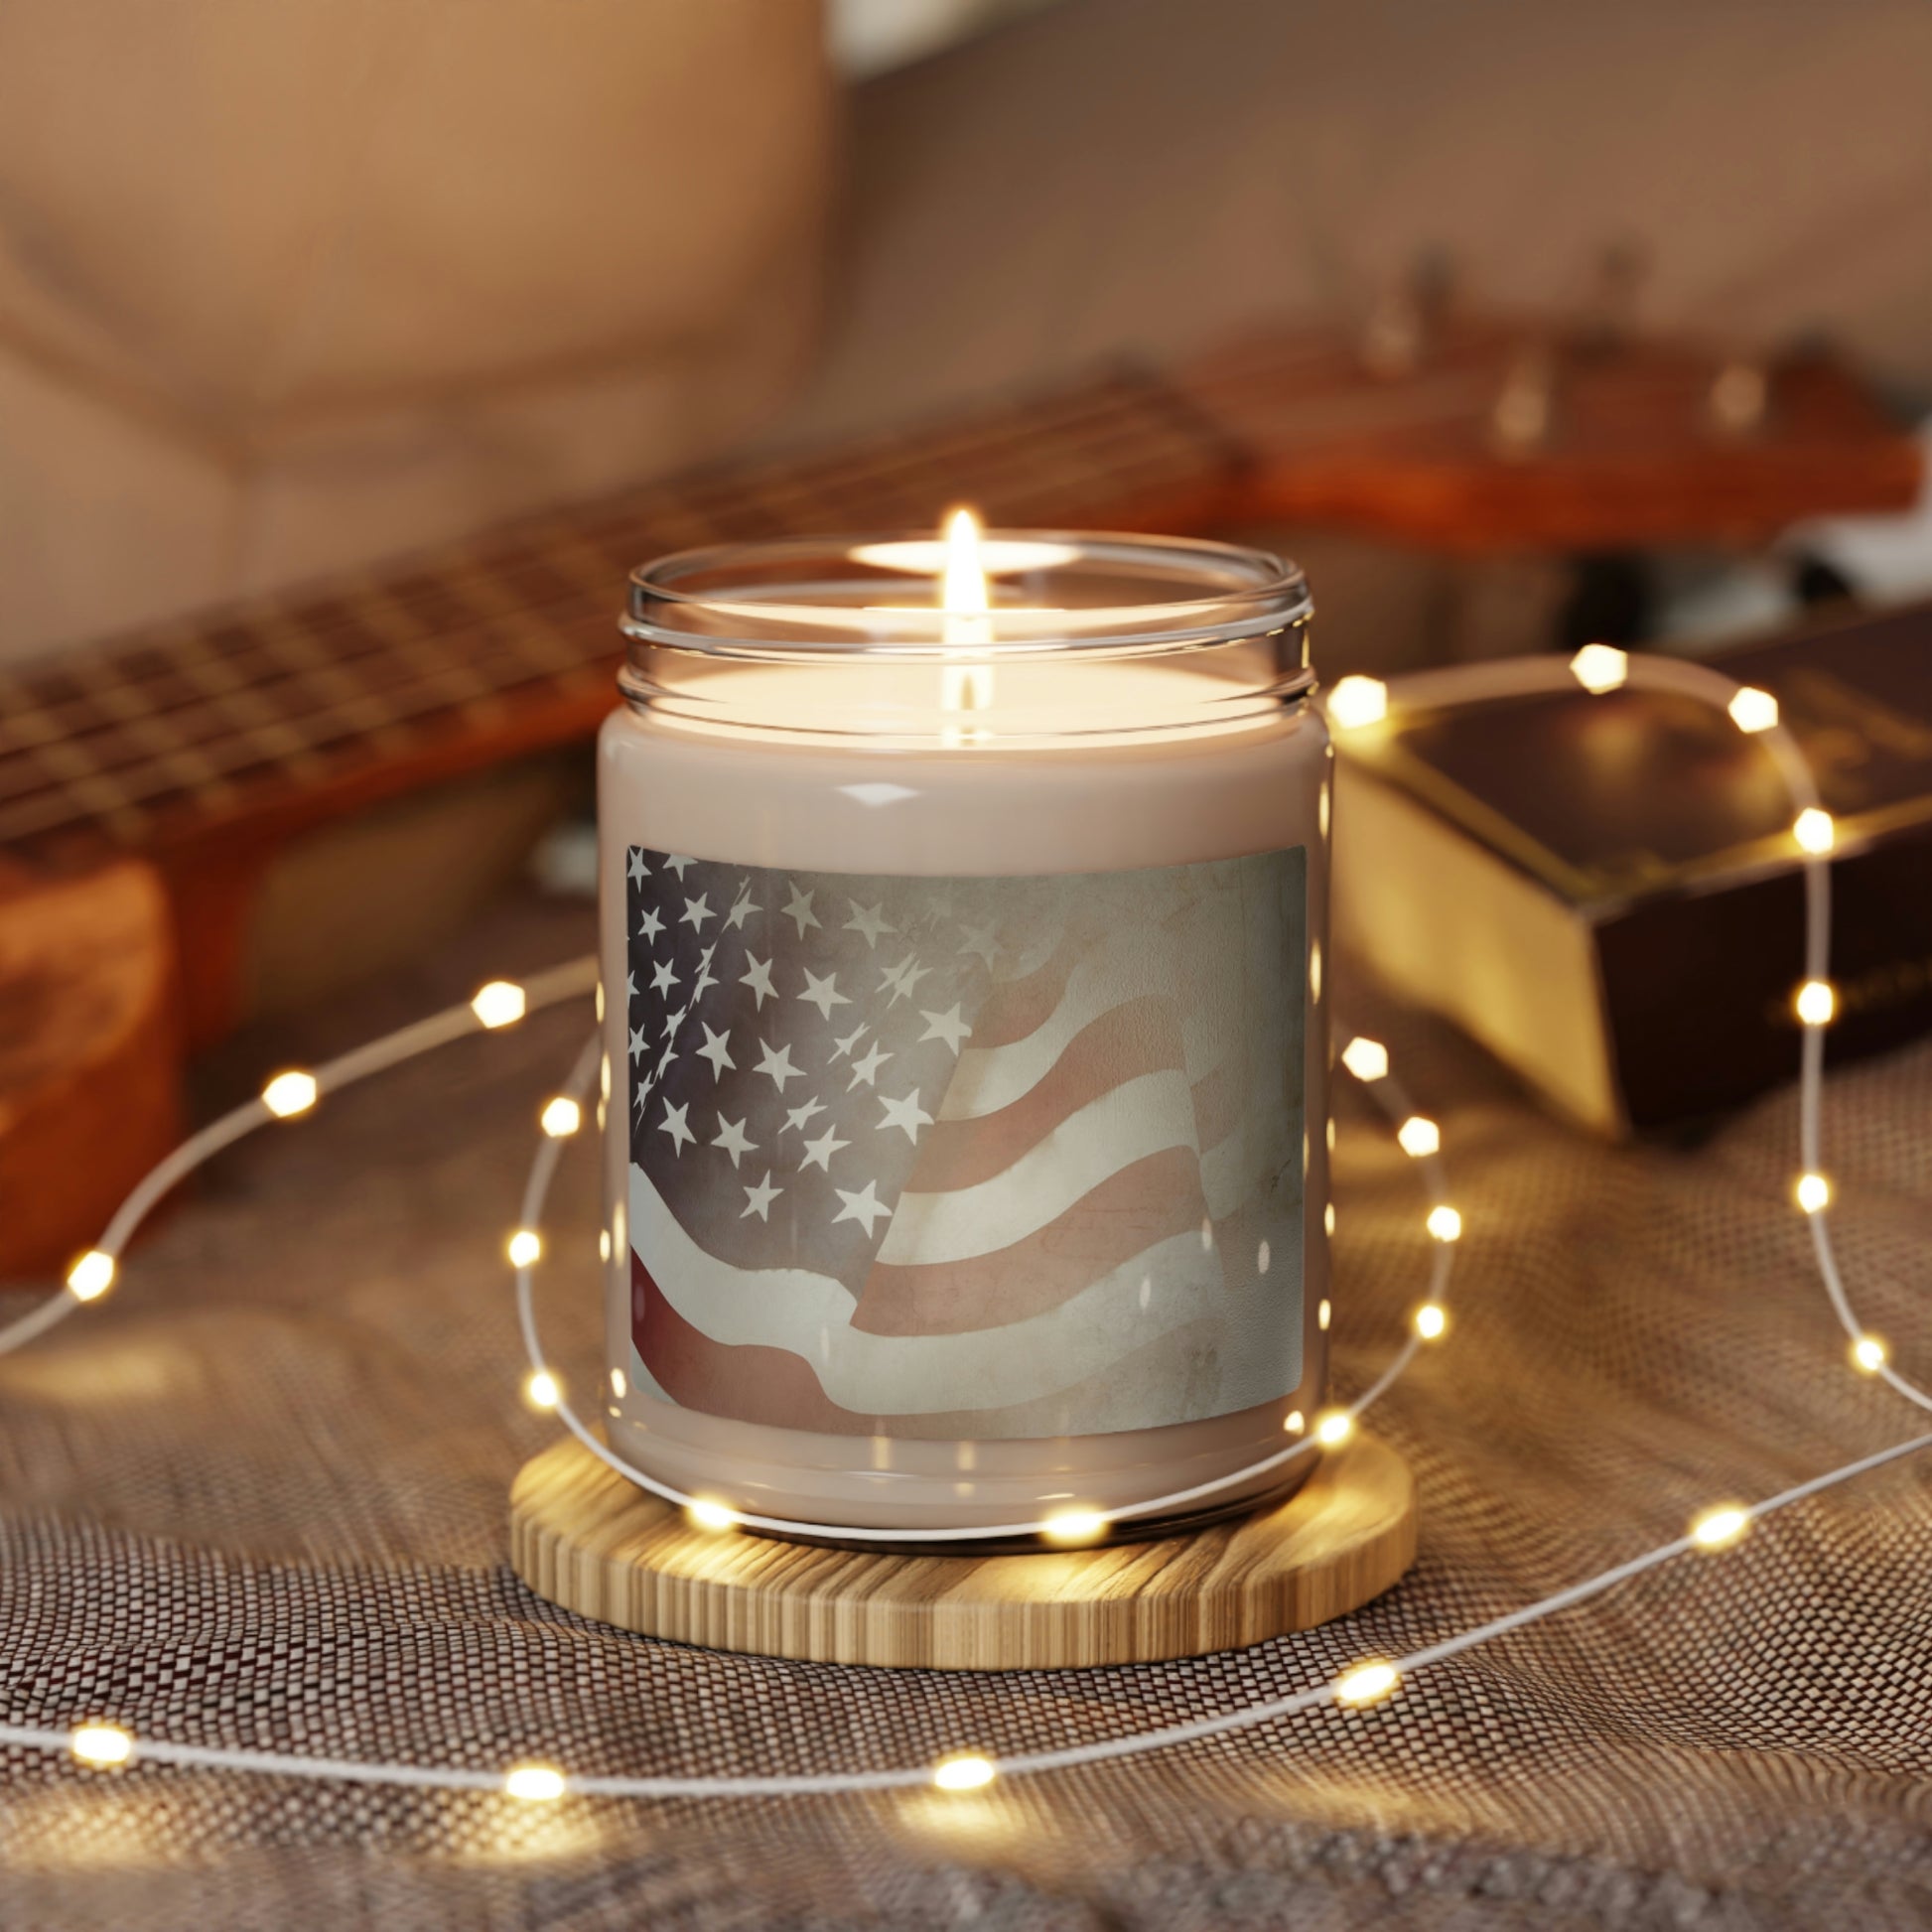 "American Flag" Candle - Weave Got Gifts - Unique Gifts You Won’t Find Anywhere Else!